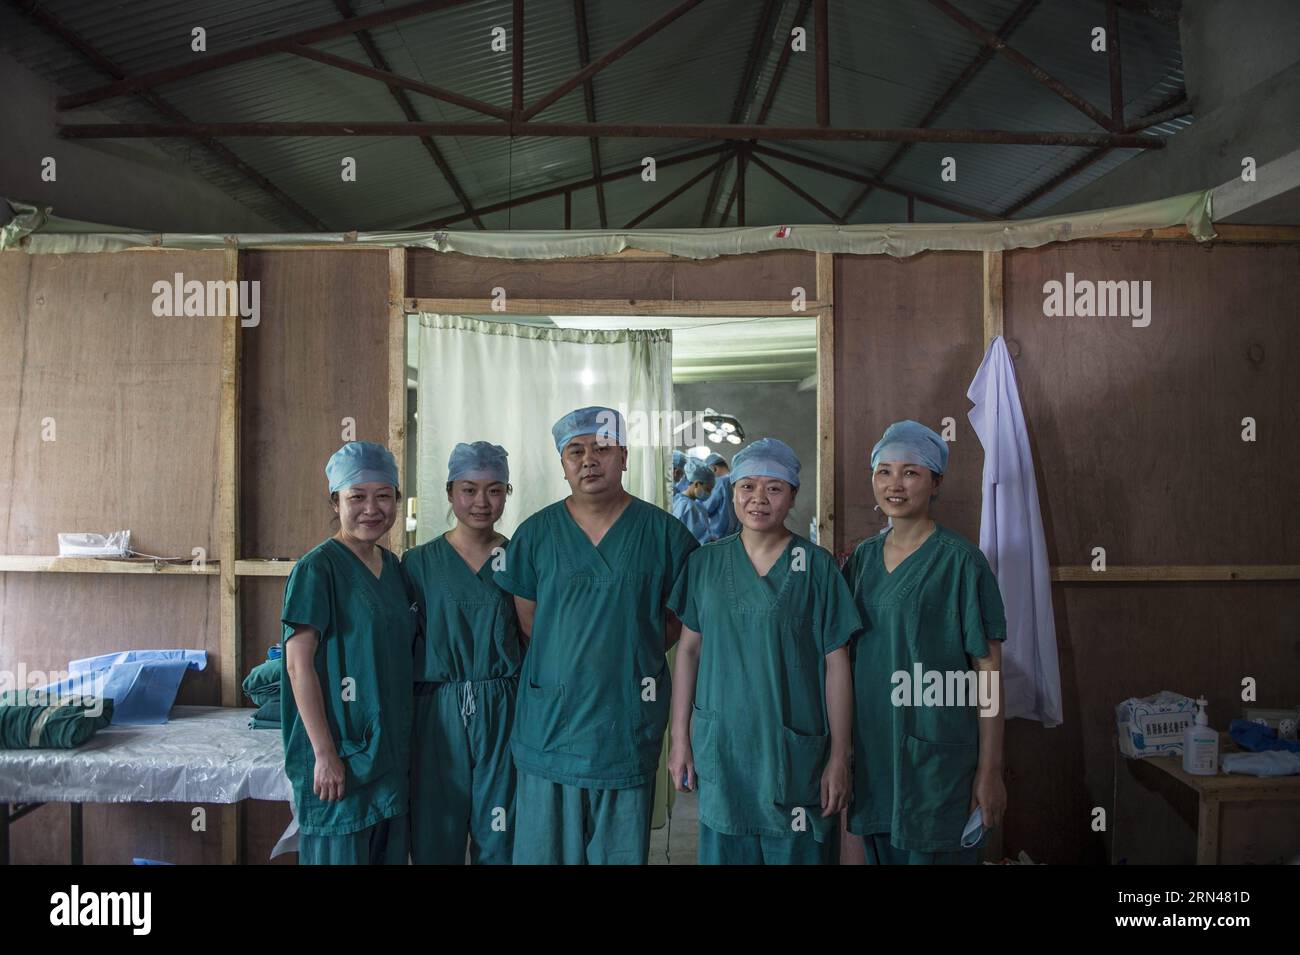 Members of emergency department of China s Chengdu Military Region Medical Team pose for a group photo outside the door of an operating room in Kathmandu, Nepal, May 10, 2015. Since the arrival, the Chengdu Military Region Medical Team, the only foreign aid team capable of performing full-spectrum bone- related surgical operations, has treated over 200 patients, conducted more than 100 surgical operations, including 34 major ones. The team has also provided psychological counseling to nearly 500 people, and has disinfected a total area of over 850,000 square meters. In contrast to their typica Stock Photo